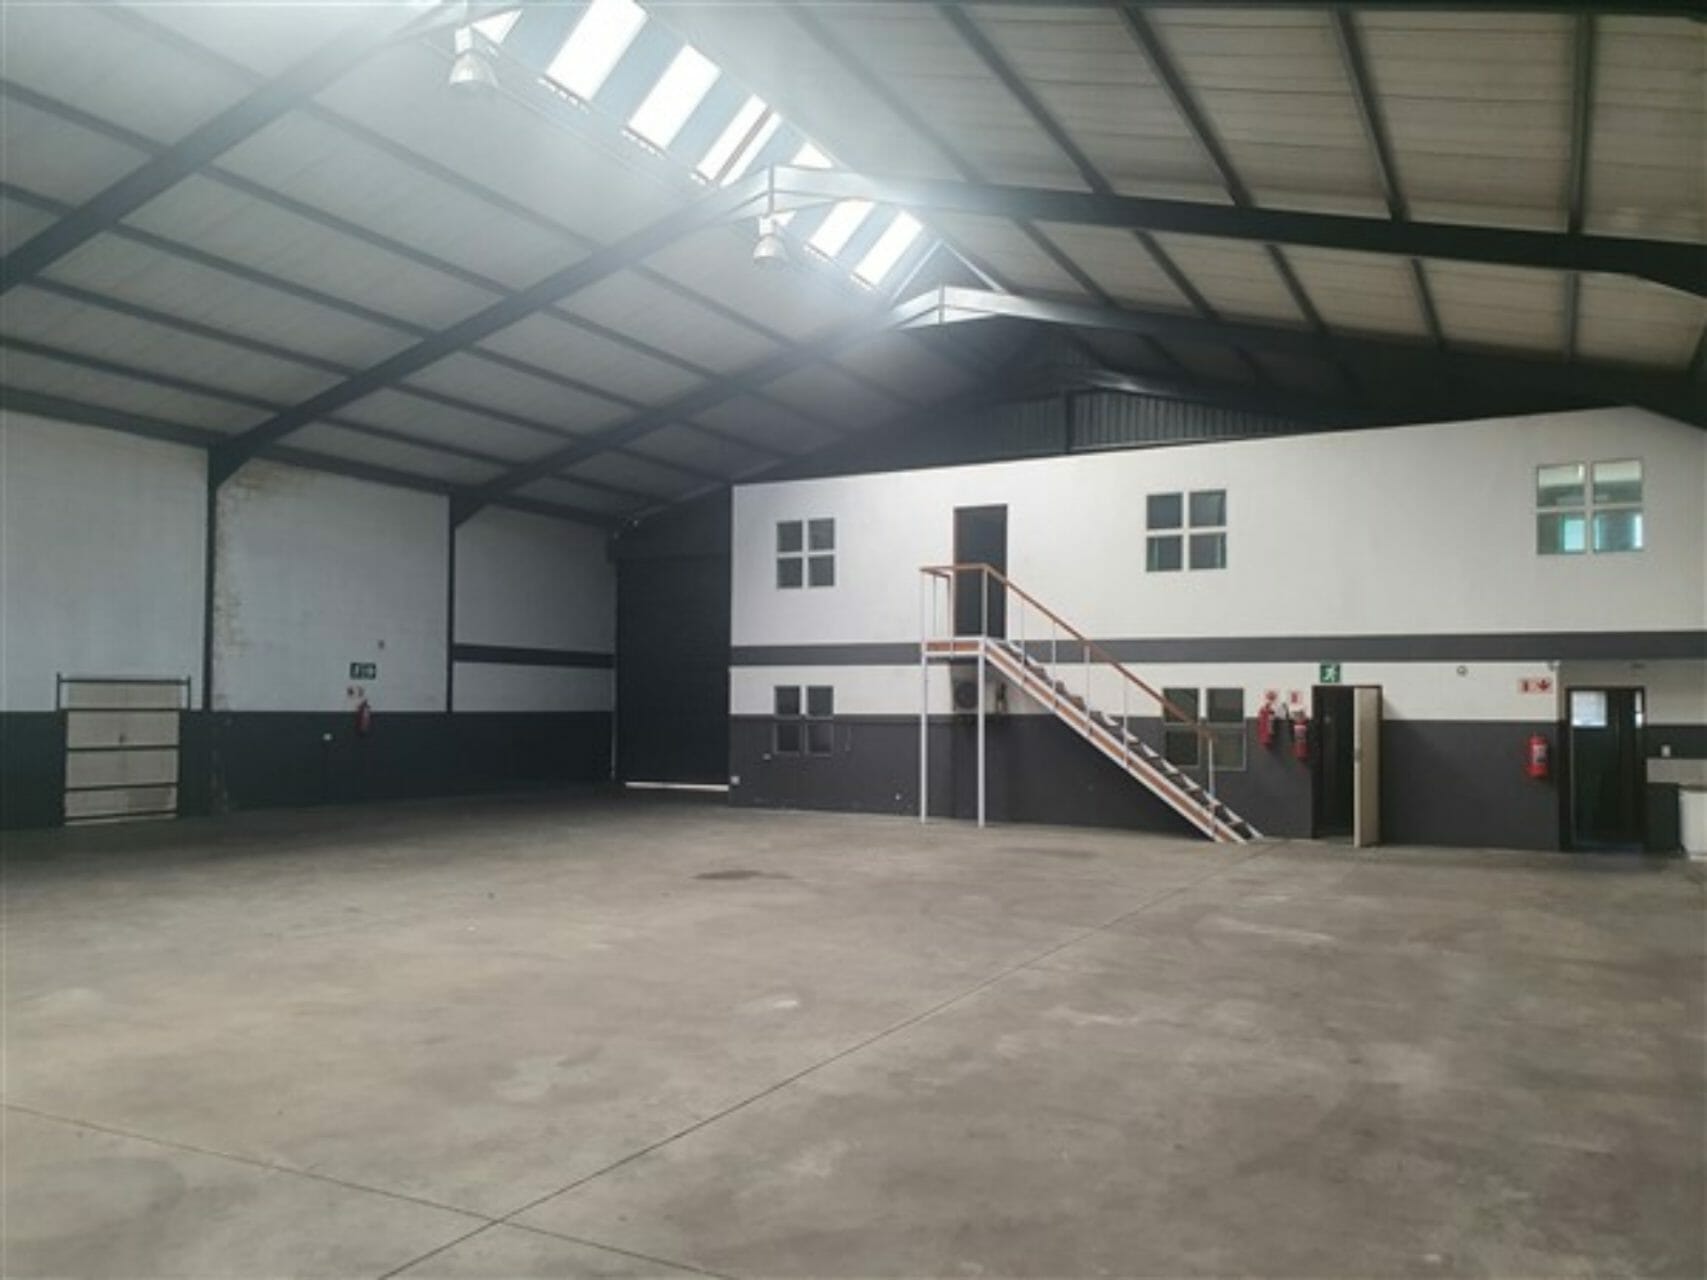 572m² – Esvian Park warehouse & offices to let in Epping